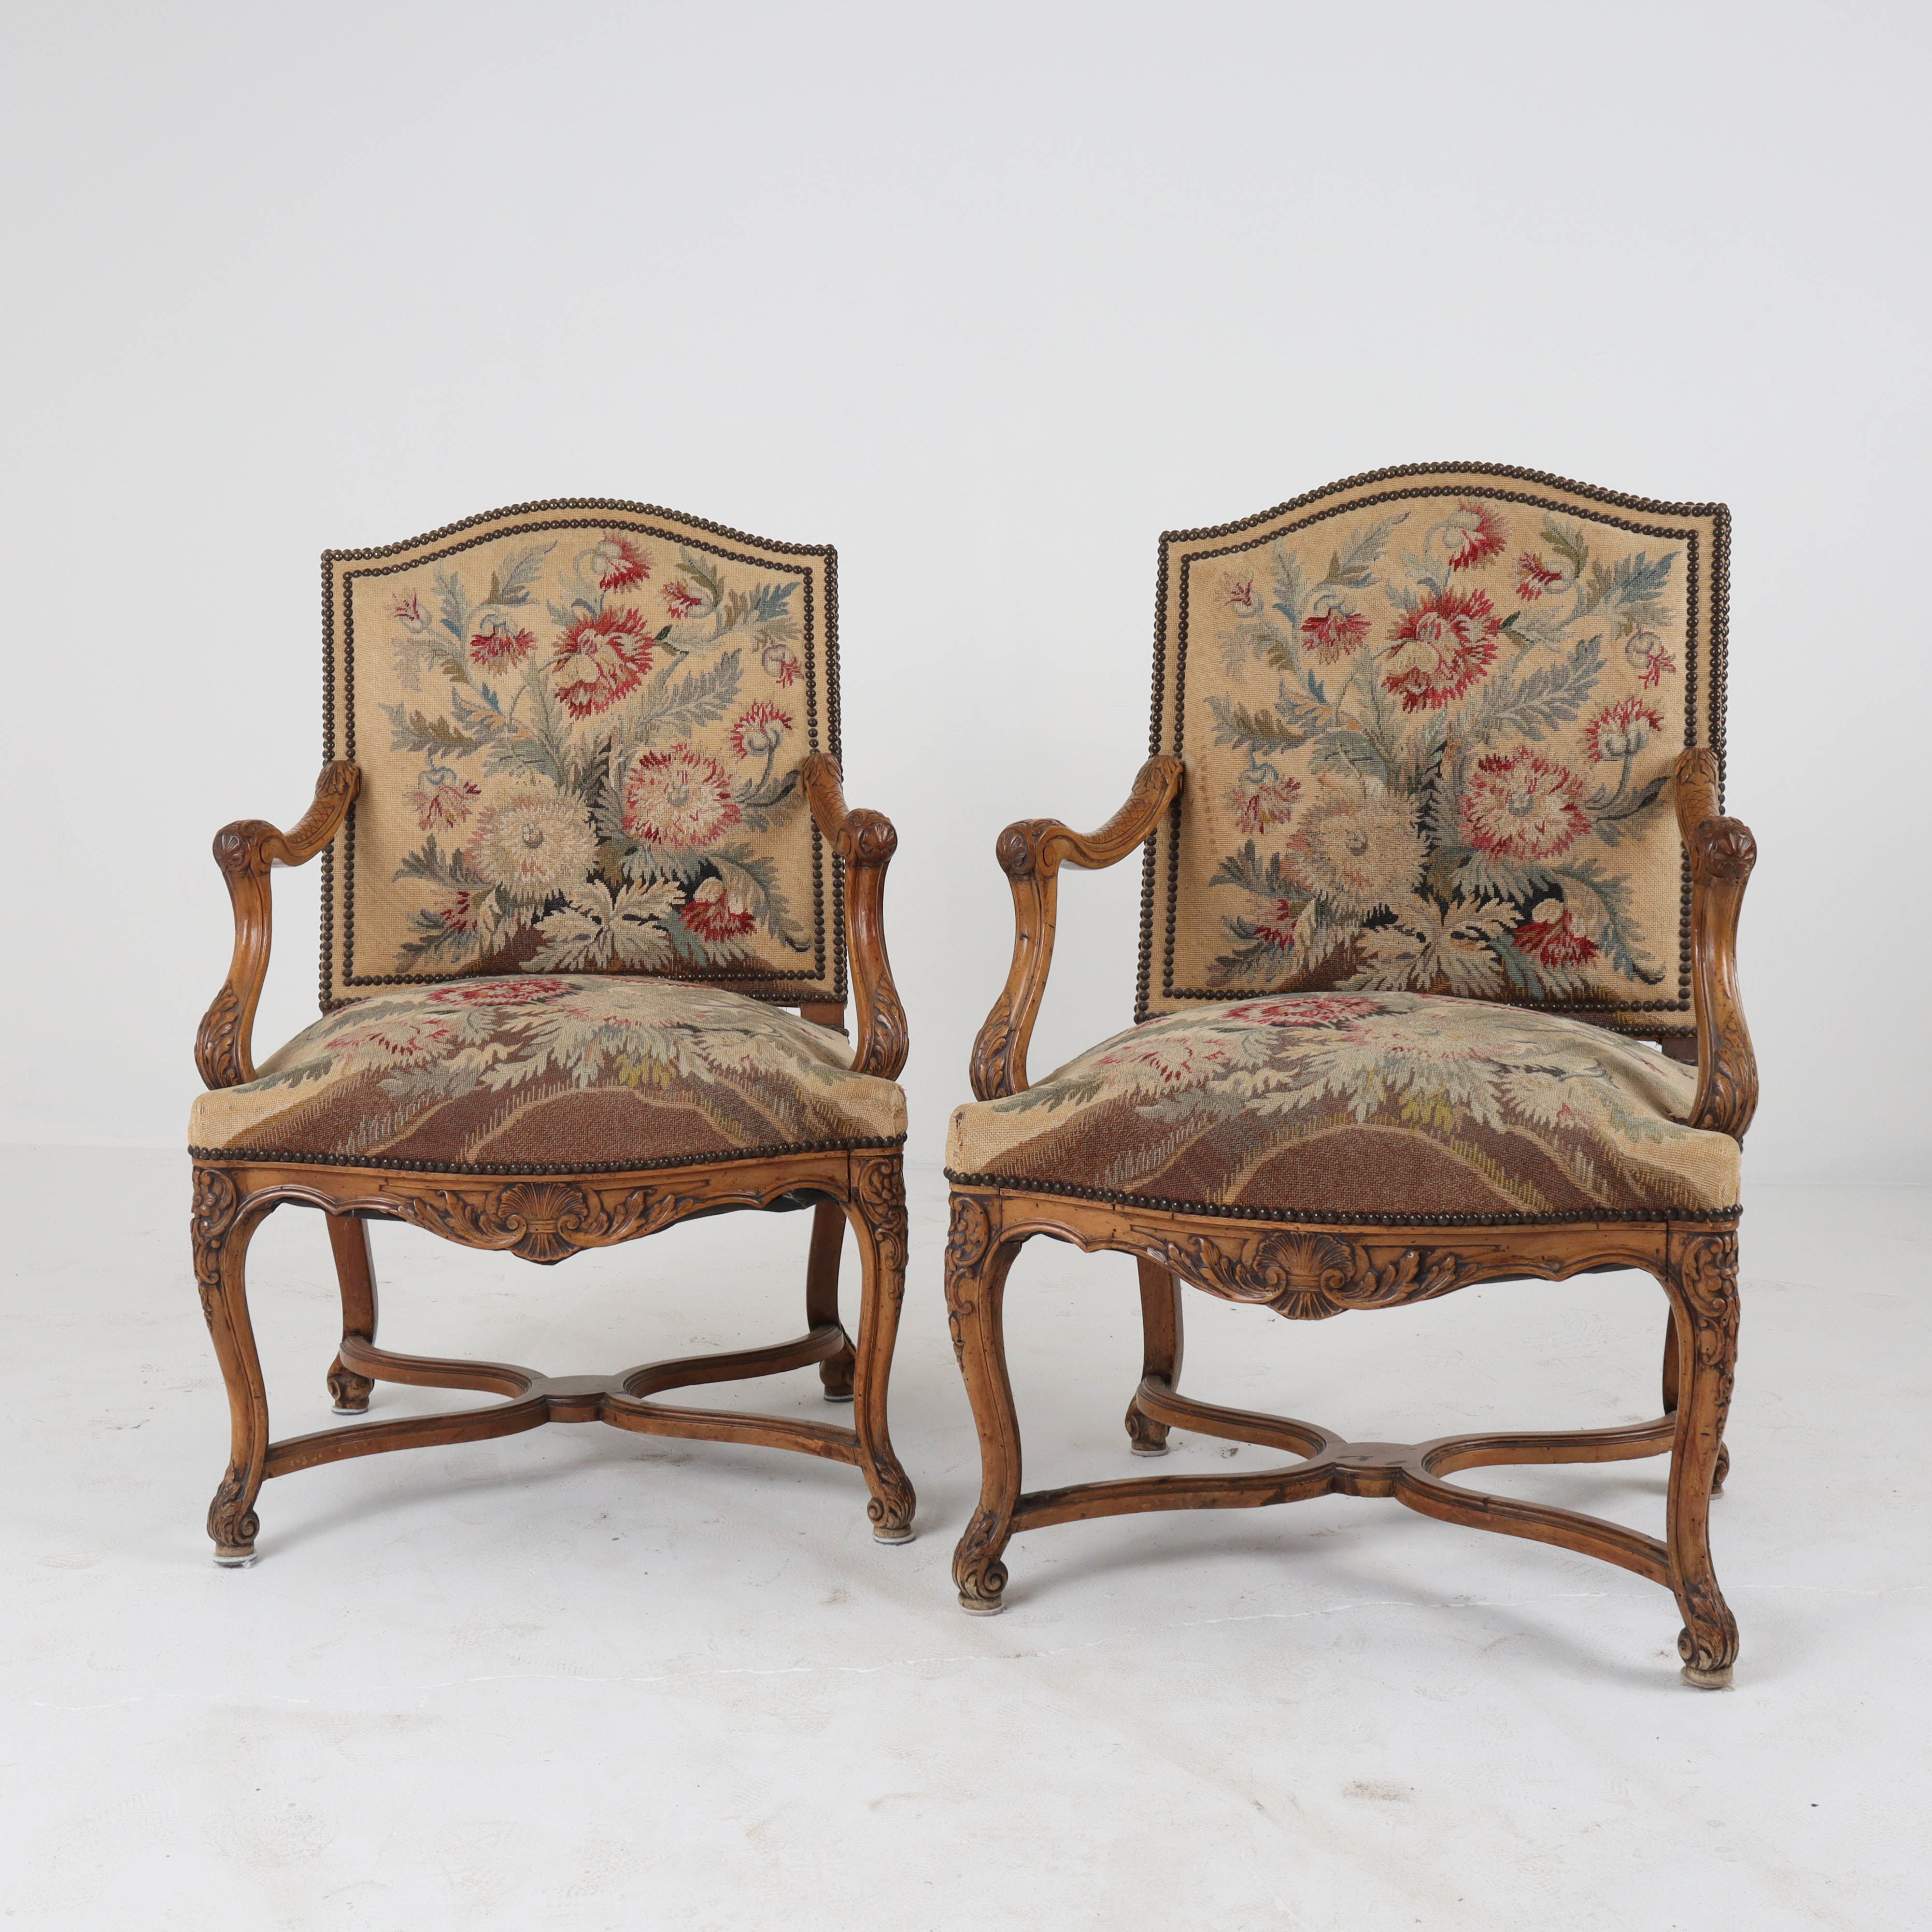 Pair of French Antique Needlepoint Fauteuil Chairs c1850 – English